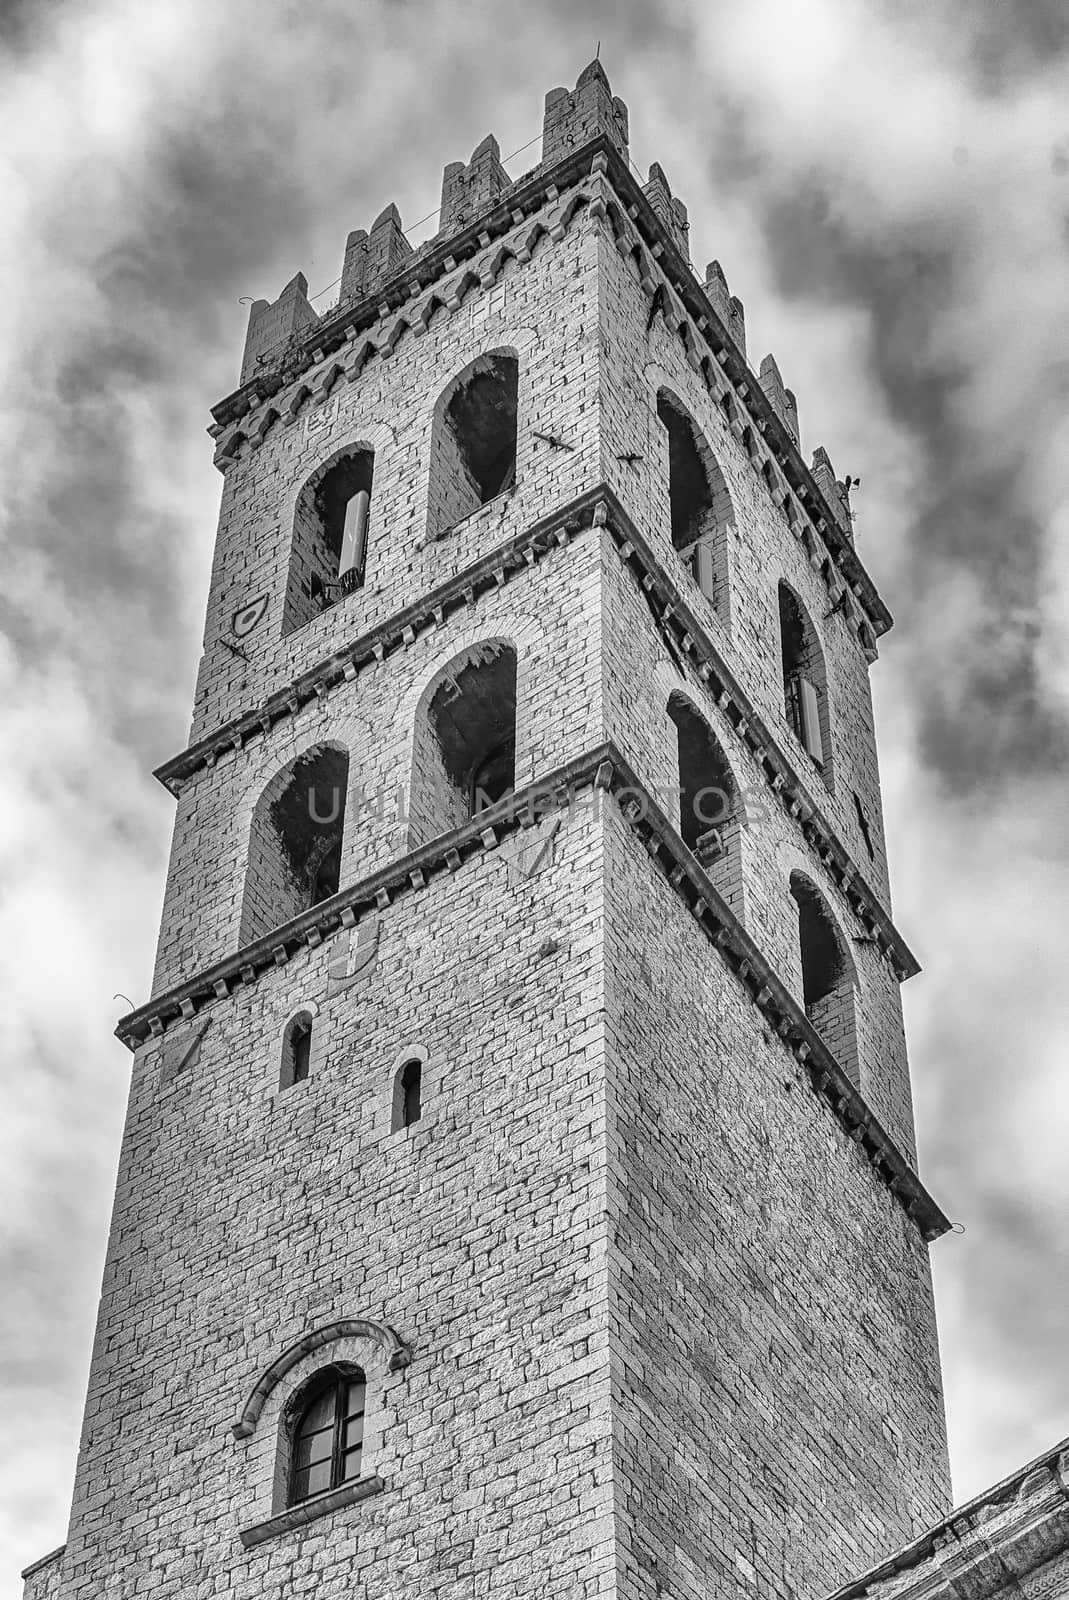 Belltower of the Temple of Minerva, landmark in Assisi, Italy by marcorubino